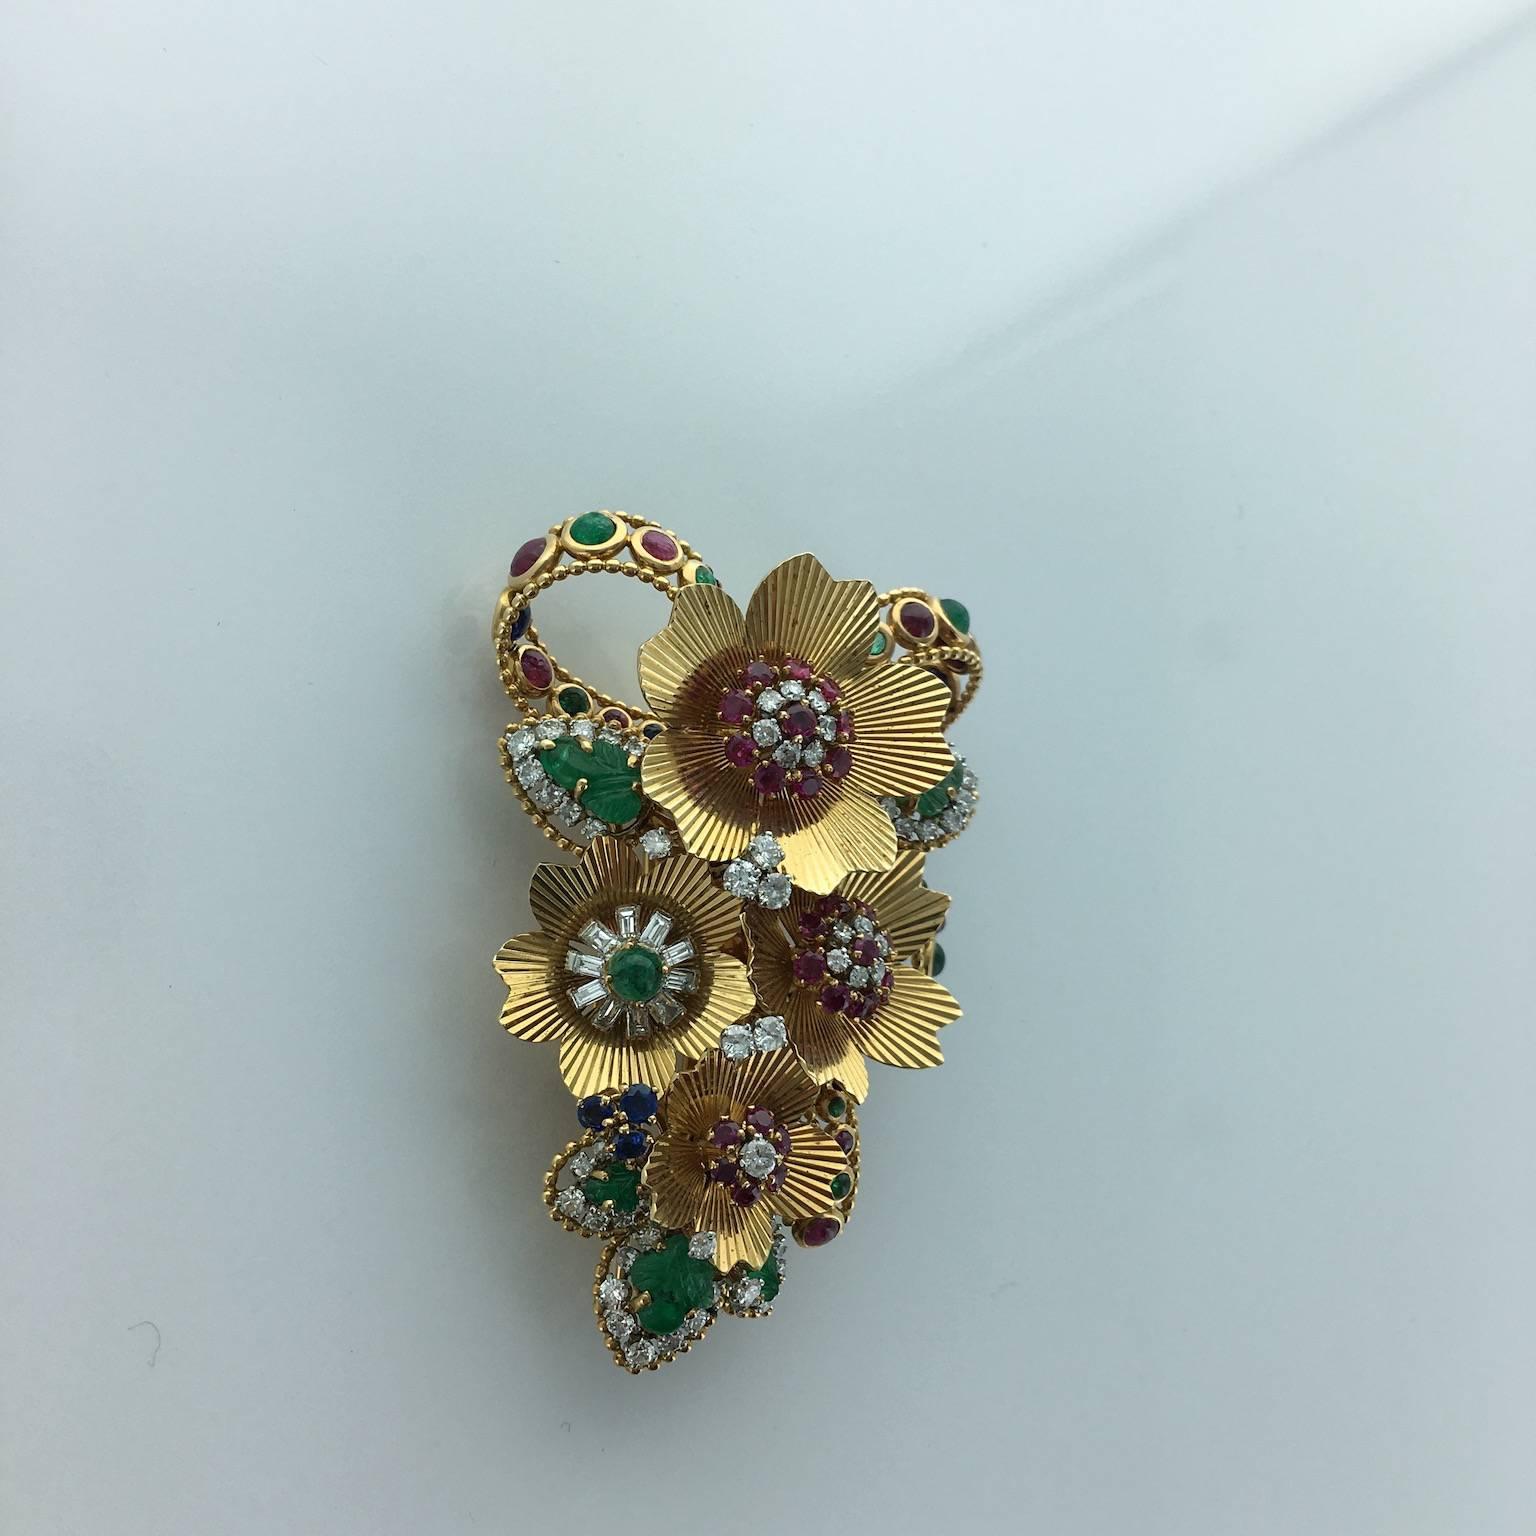 This brooch is a unique piece absolutely impressive. Yellow gold 18k 750,
Diamond among Engraved and Cabochon Emerald, Sapphire and Ruby highlight this jewel.
French assay marks and maker's mark.
Circa 1955.

Gross weight: 50.3 grams.